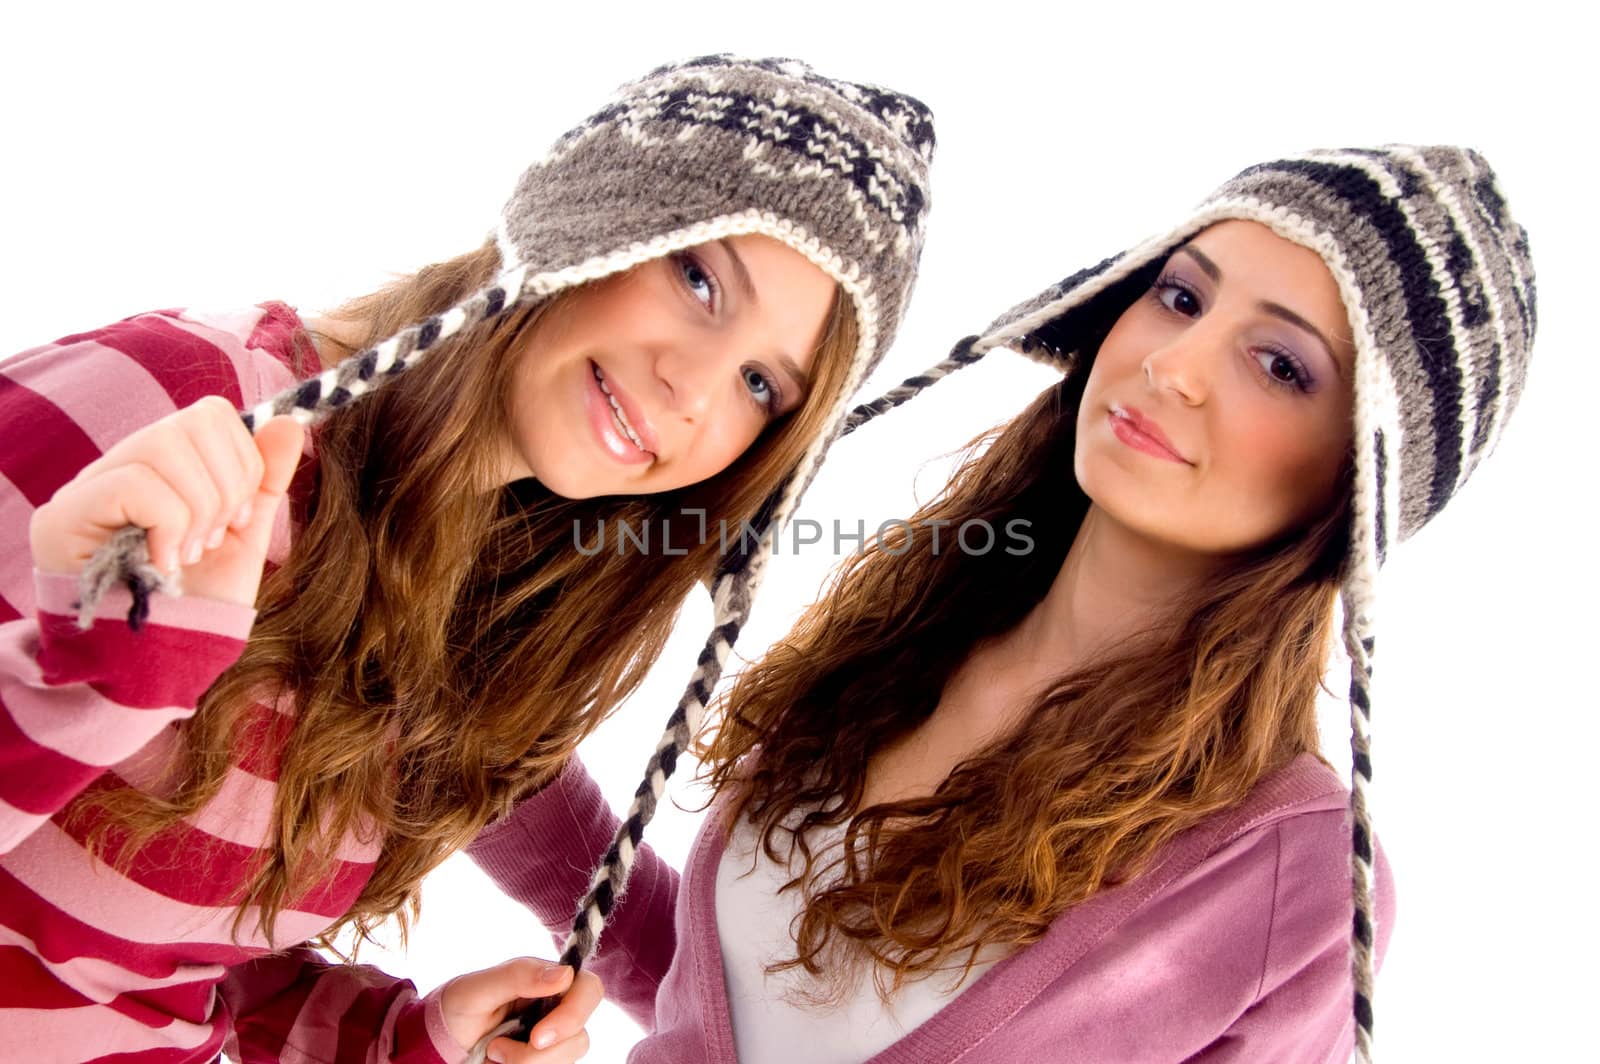 pretty girls wearing cap and looking at camera by imagerymajestic